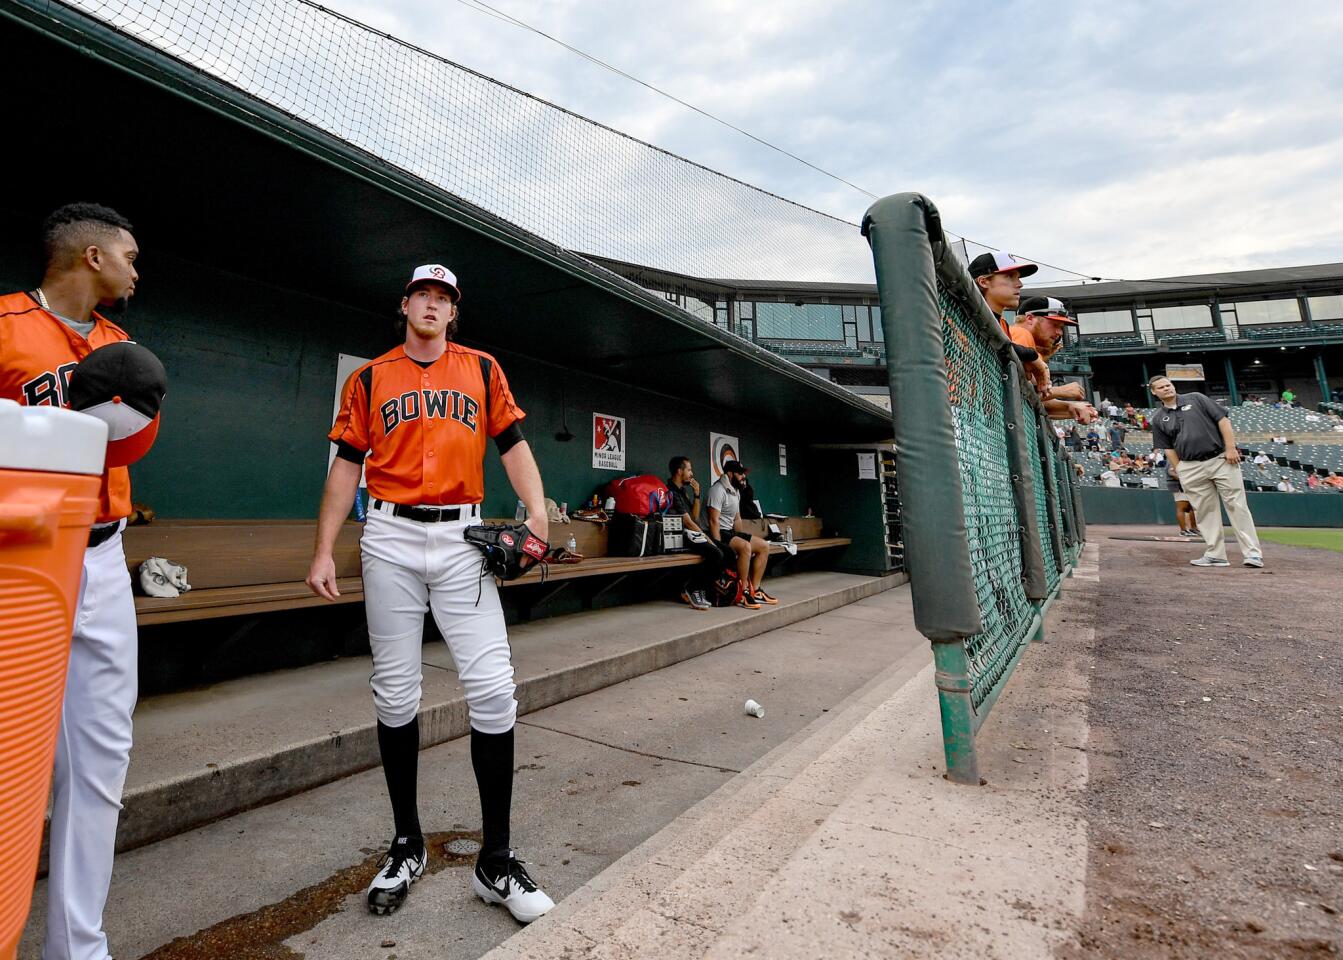 Michael Baumann, stands in the dugout during player instructions prior to the start of the game against Harrisburg. Orioles pitching prospect Michael Baumann took his dominance since joining Double-A Bowie to a new level Tuesday night with the third no-hitter in Baysox history. He mowed down Harrisburg on 95 pitches to solidify what’s been one of the most significant leaps any pitcher in the farm system has made this season.